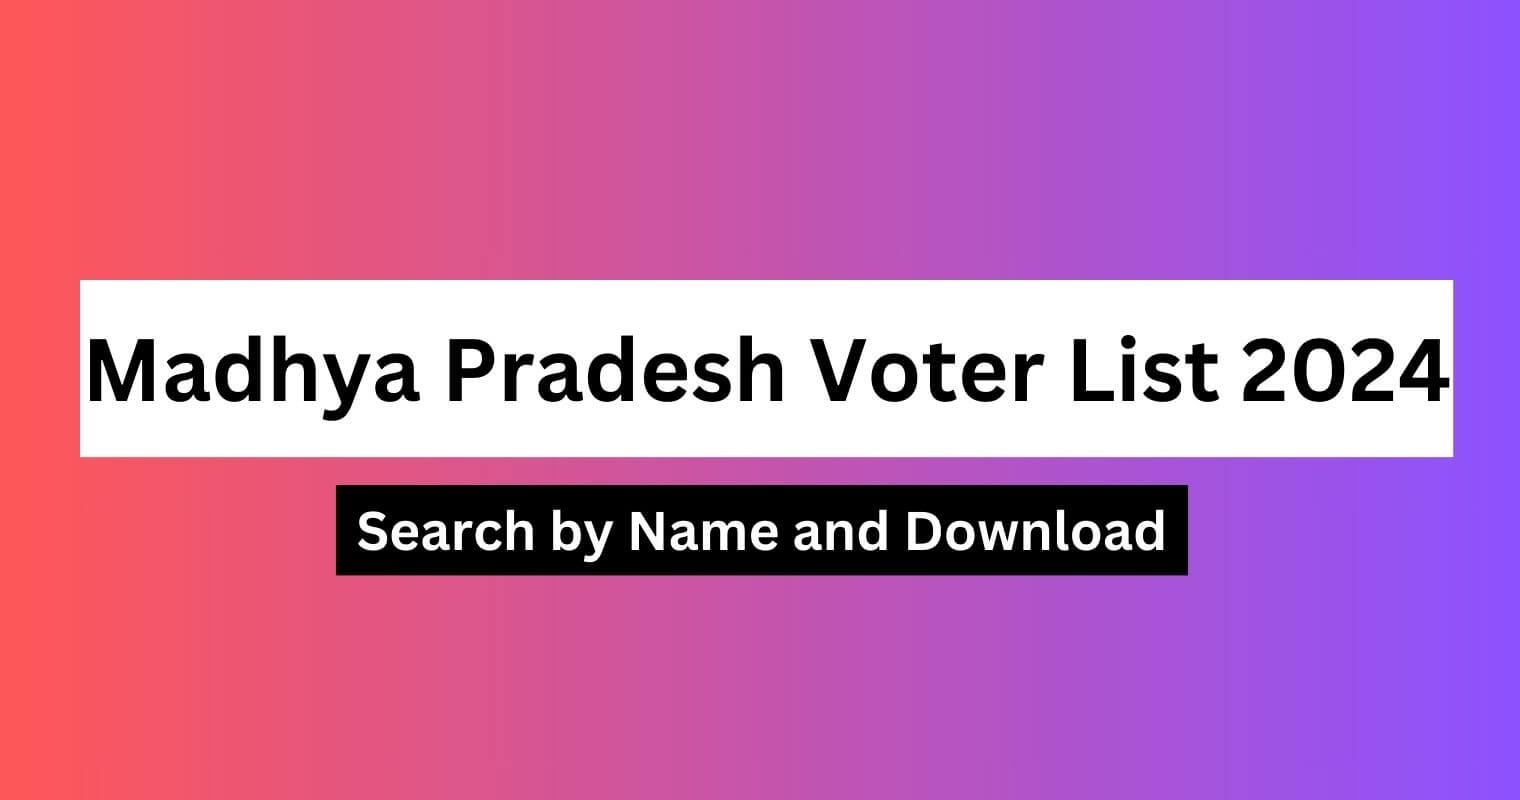 Madhya Pradesh Voter List 2024 Search By Name, Download